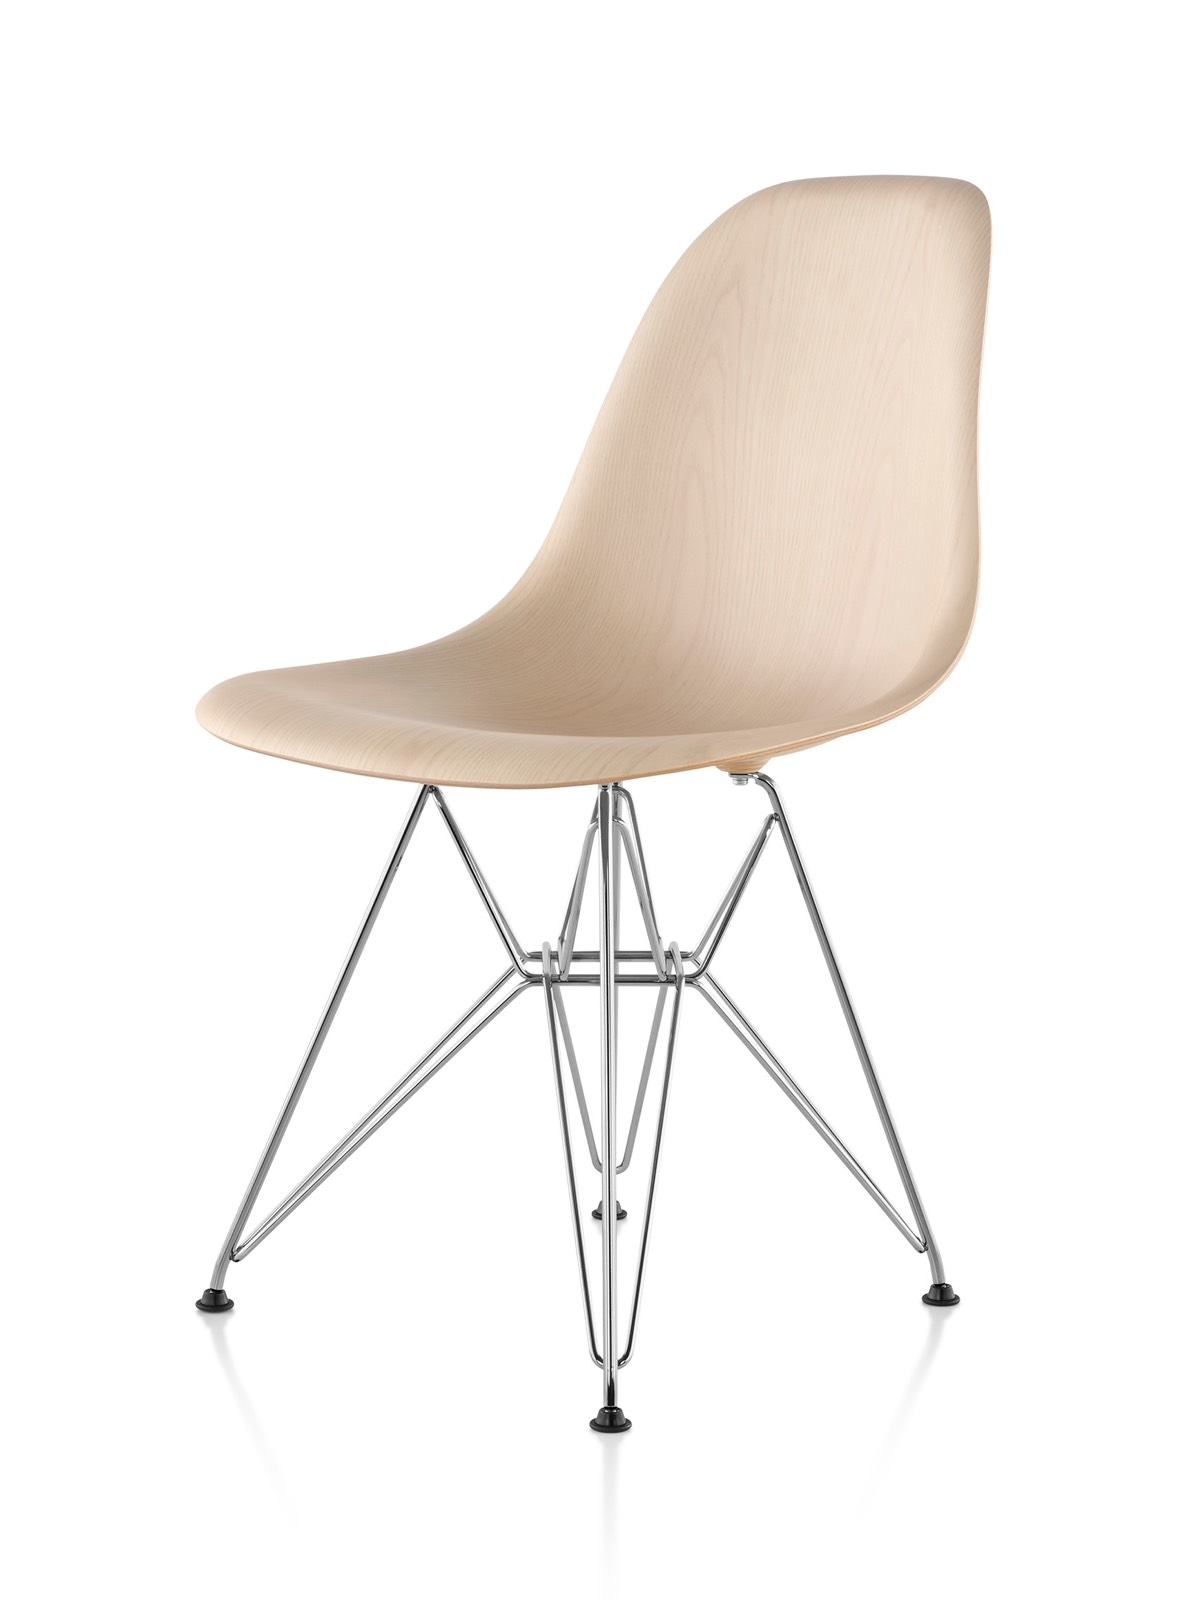 Eames Molded Wood side chair with a light finish and wire base, viewed from a 45-degree angle.